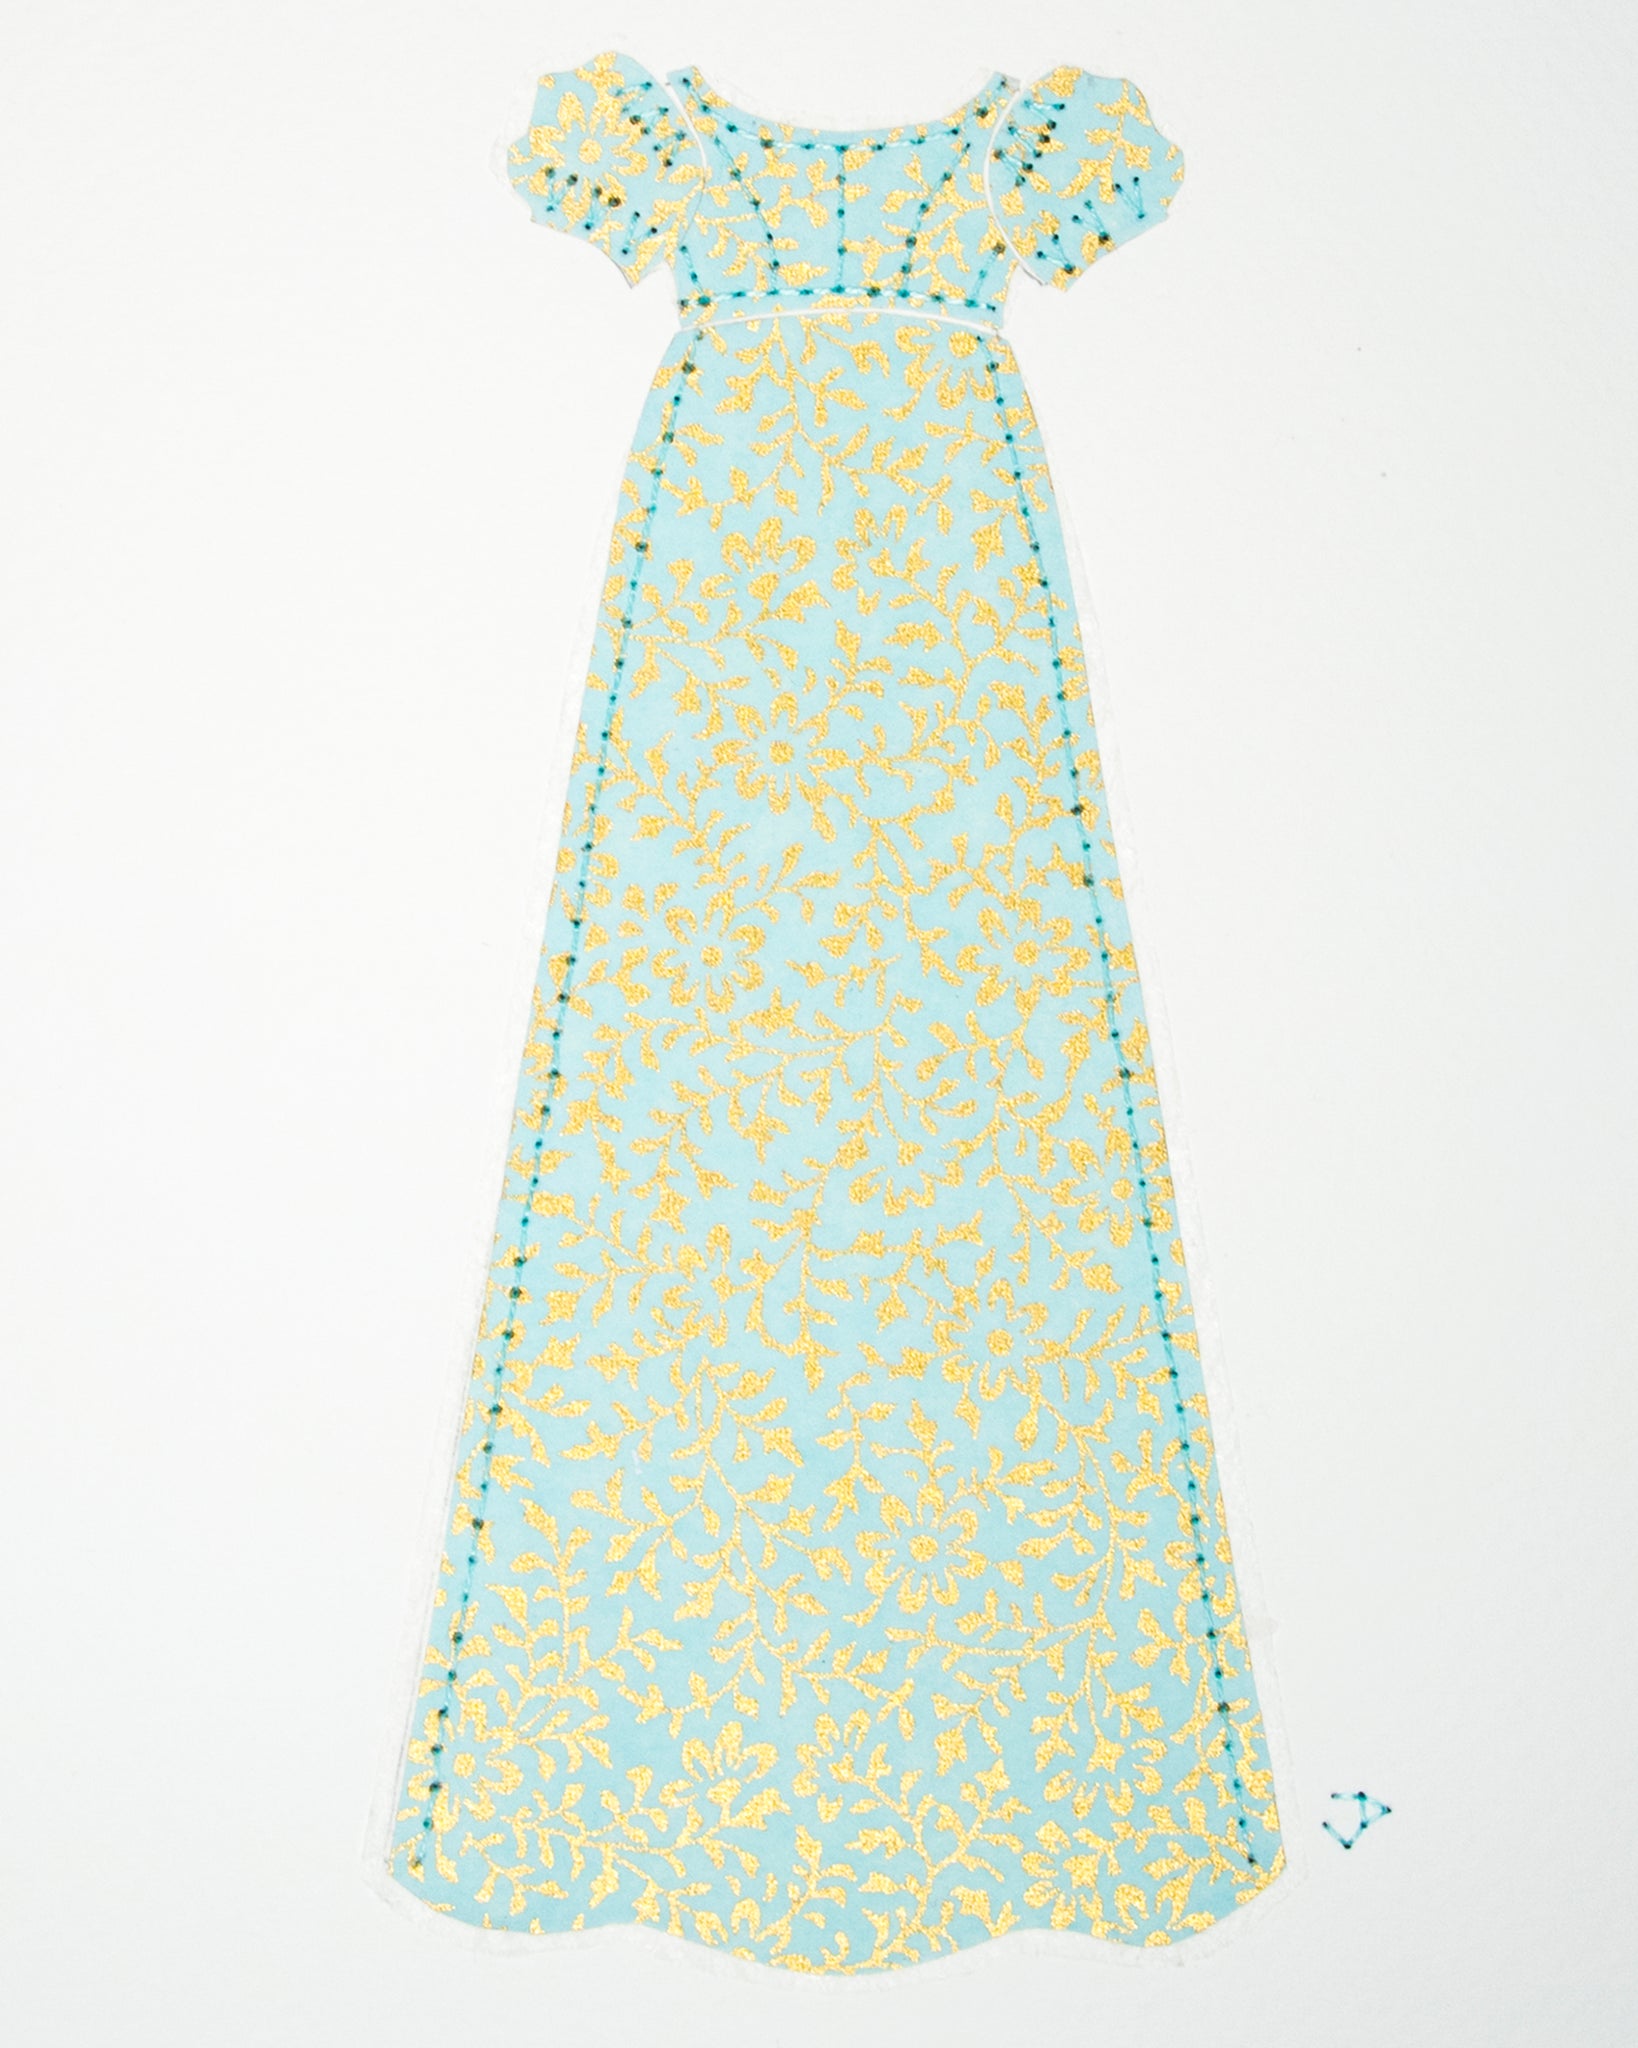 Dress #010: Regency dress in mint and gold: front view. 2014